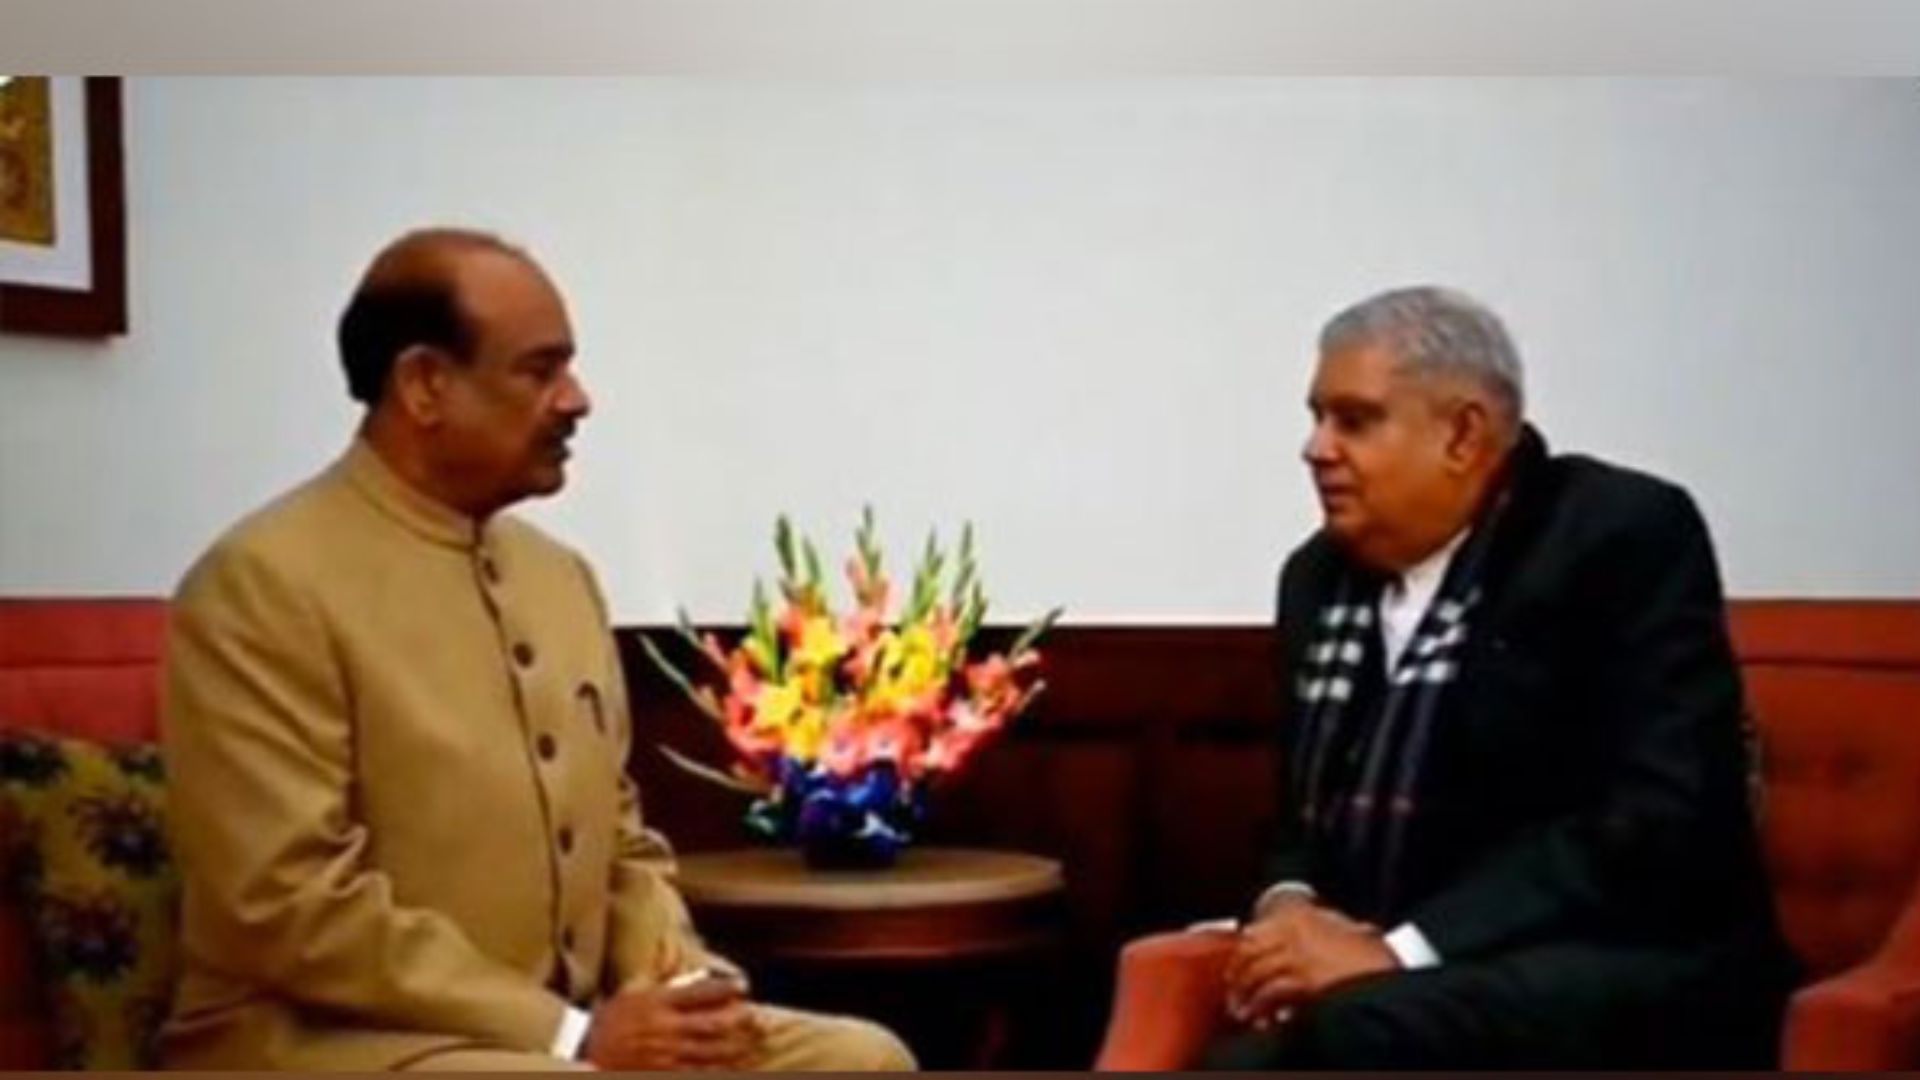 LS Speaker Om Birla meets with RS Chairman, expresses concerns over mimicry incident